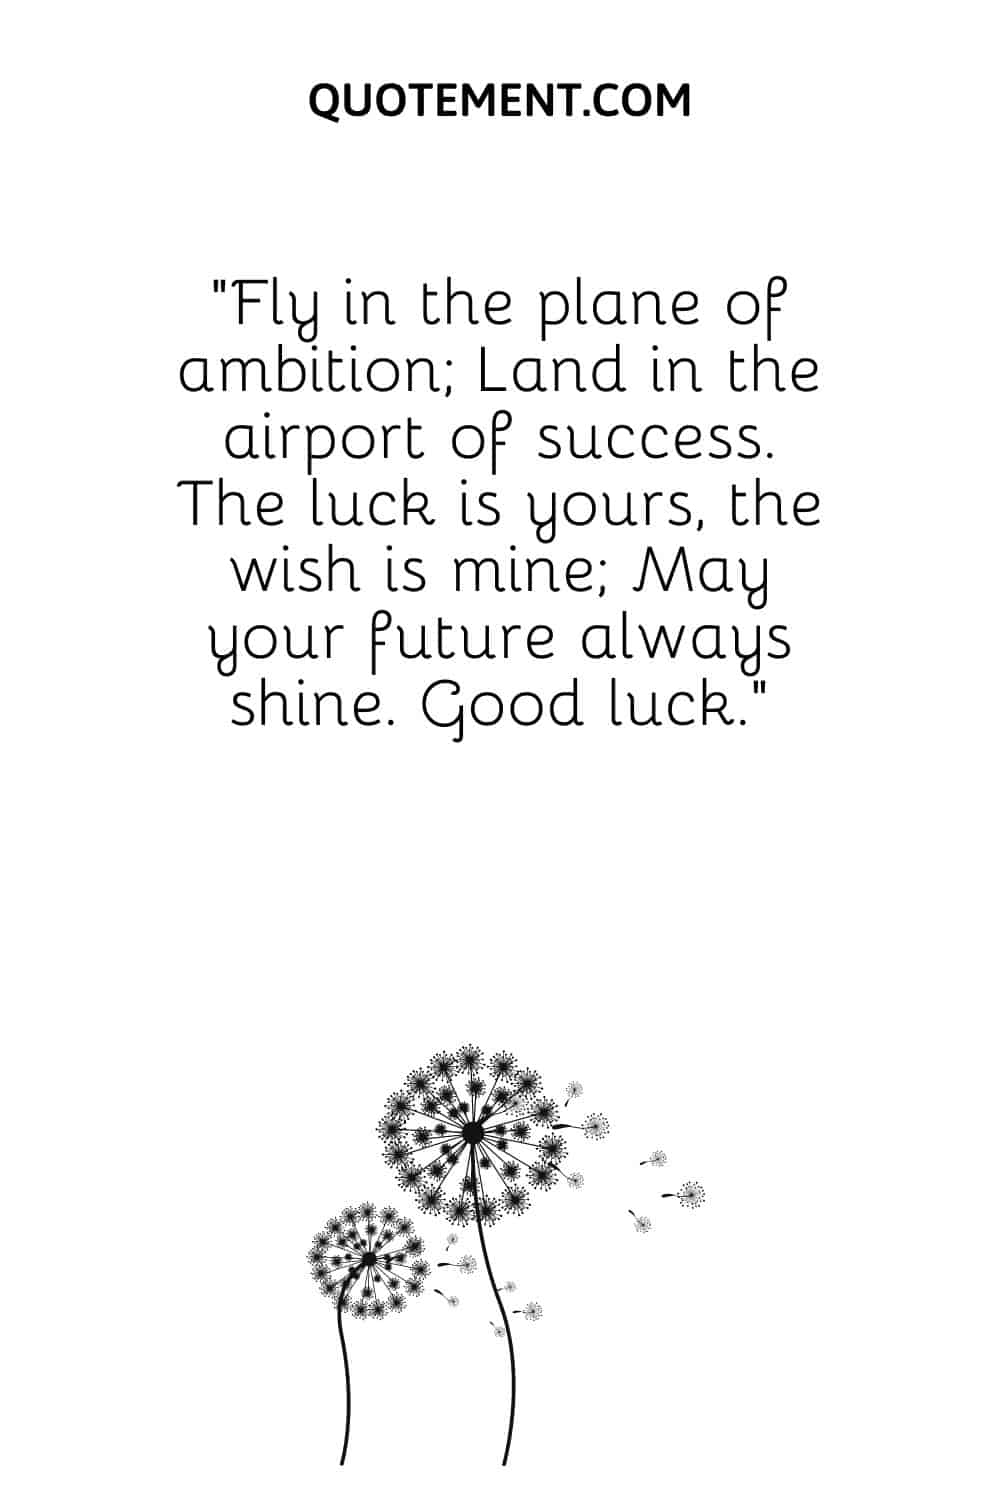 Fly in the plane of ambition; Land in the airport of success